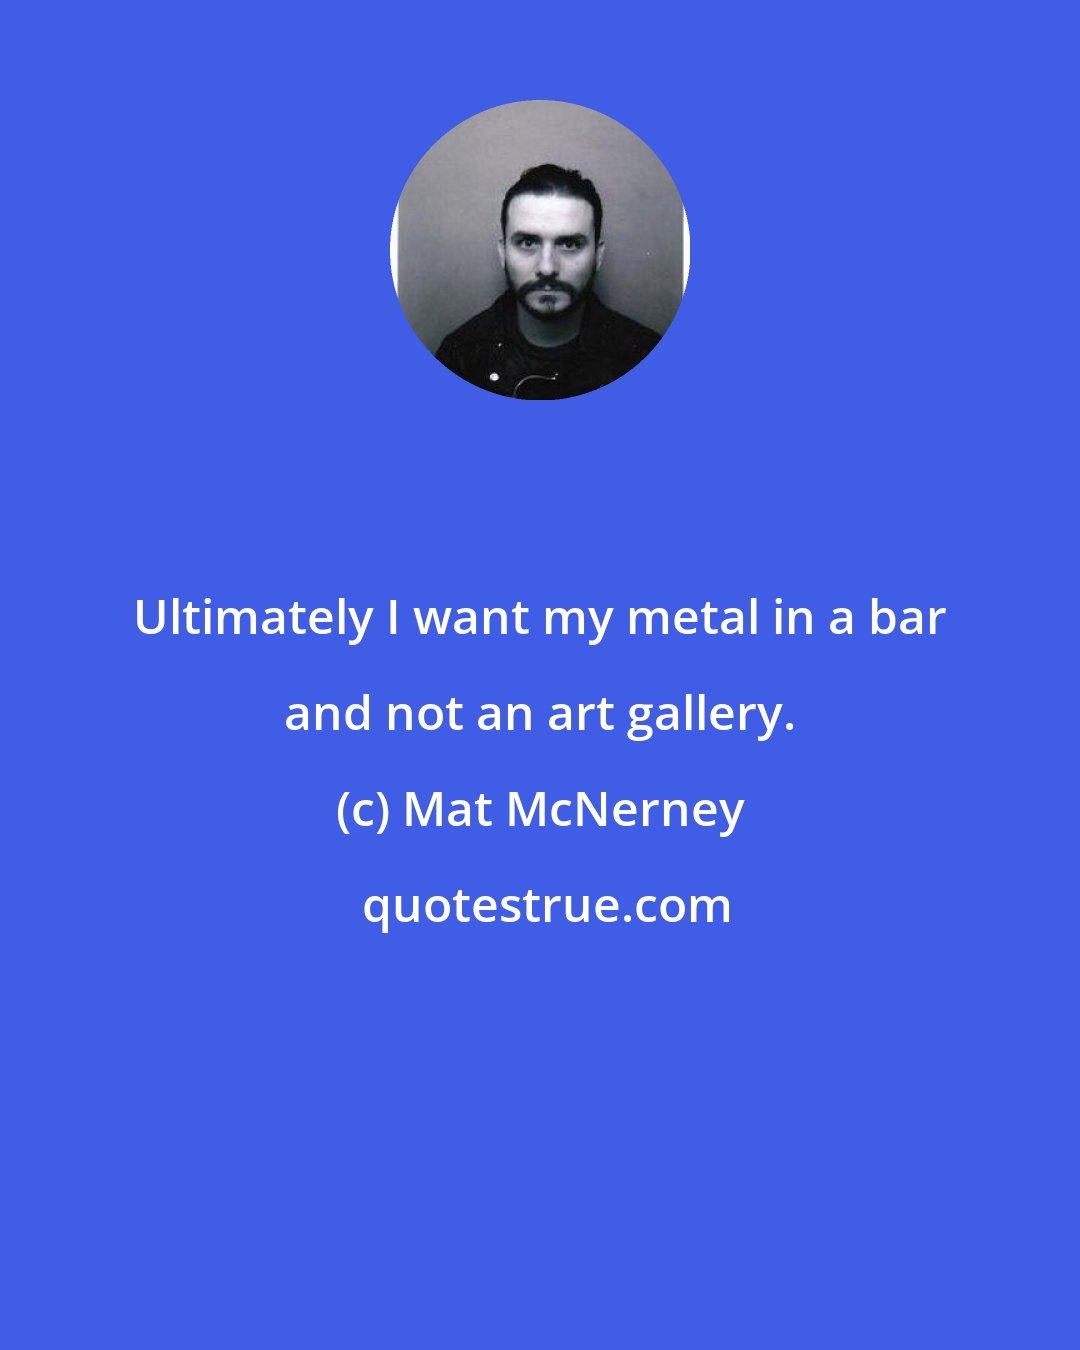 Mat McNerney: Ultimately I want my metal in a bar and not an art gallery.